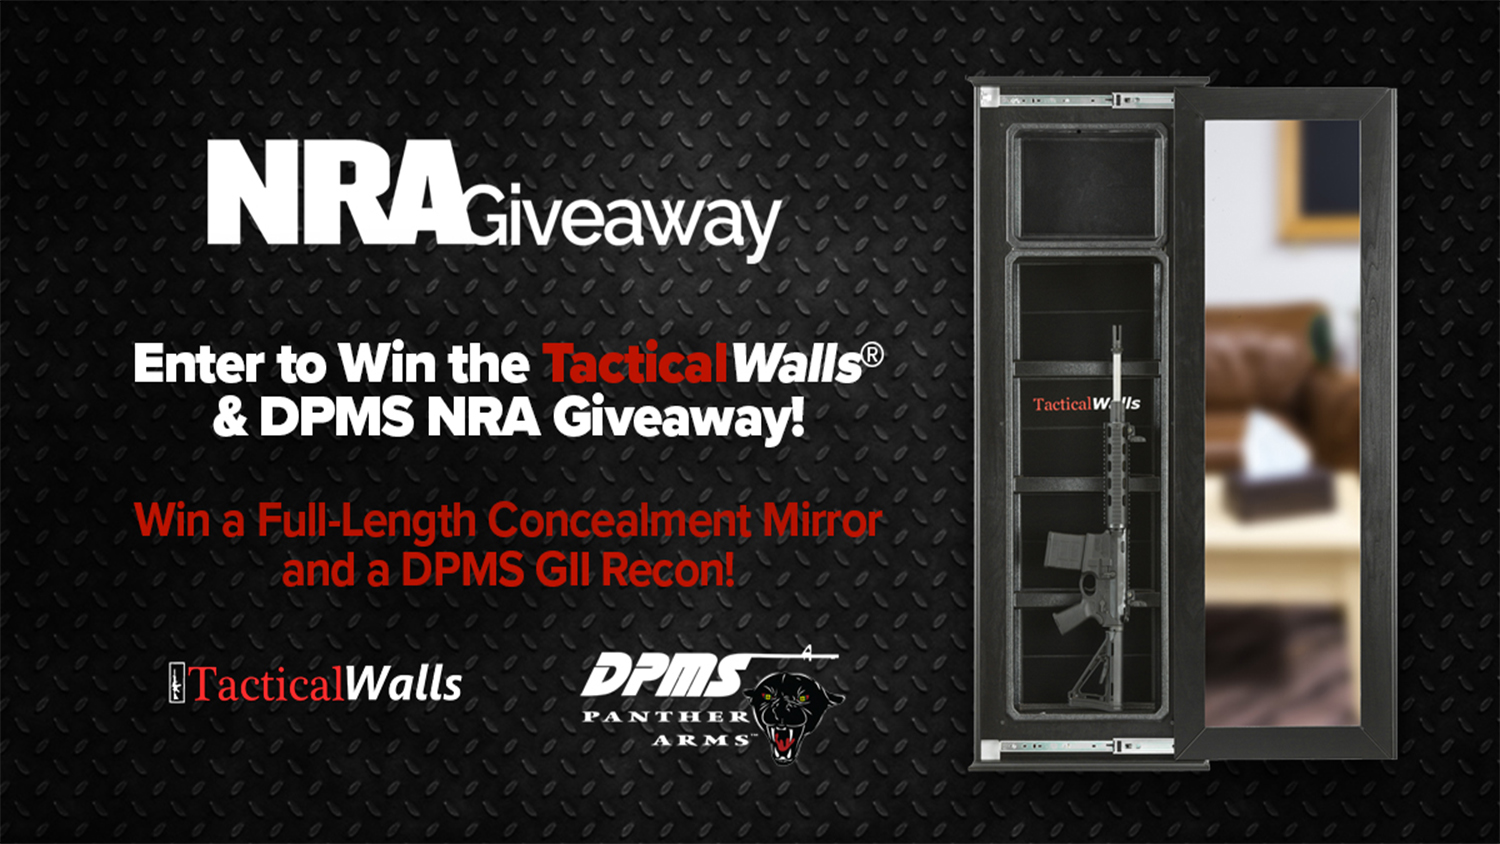 NRA Giveaway